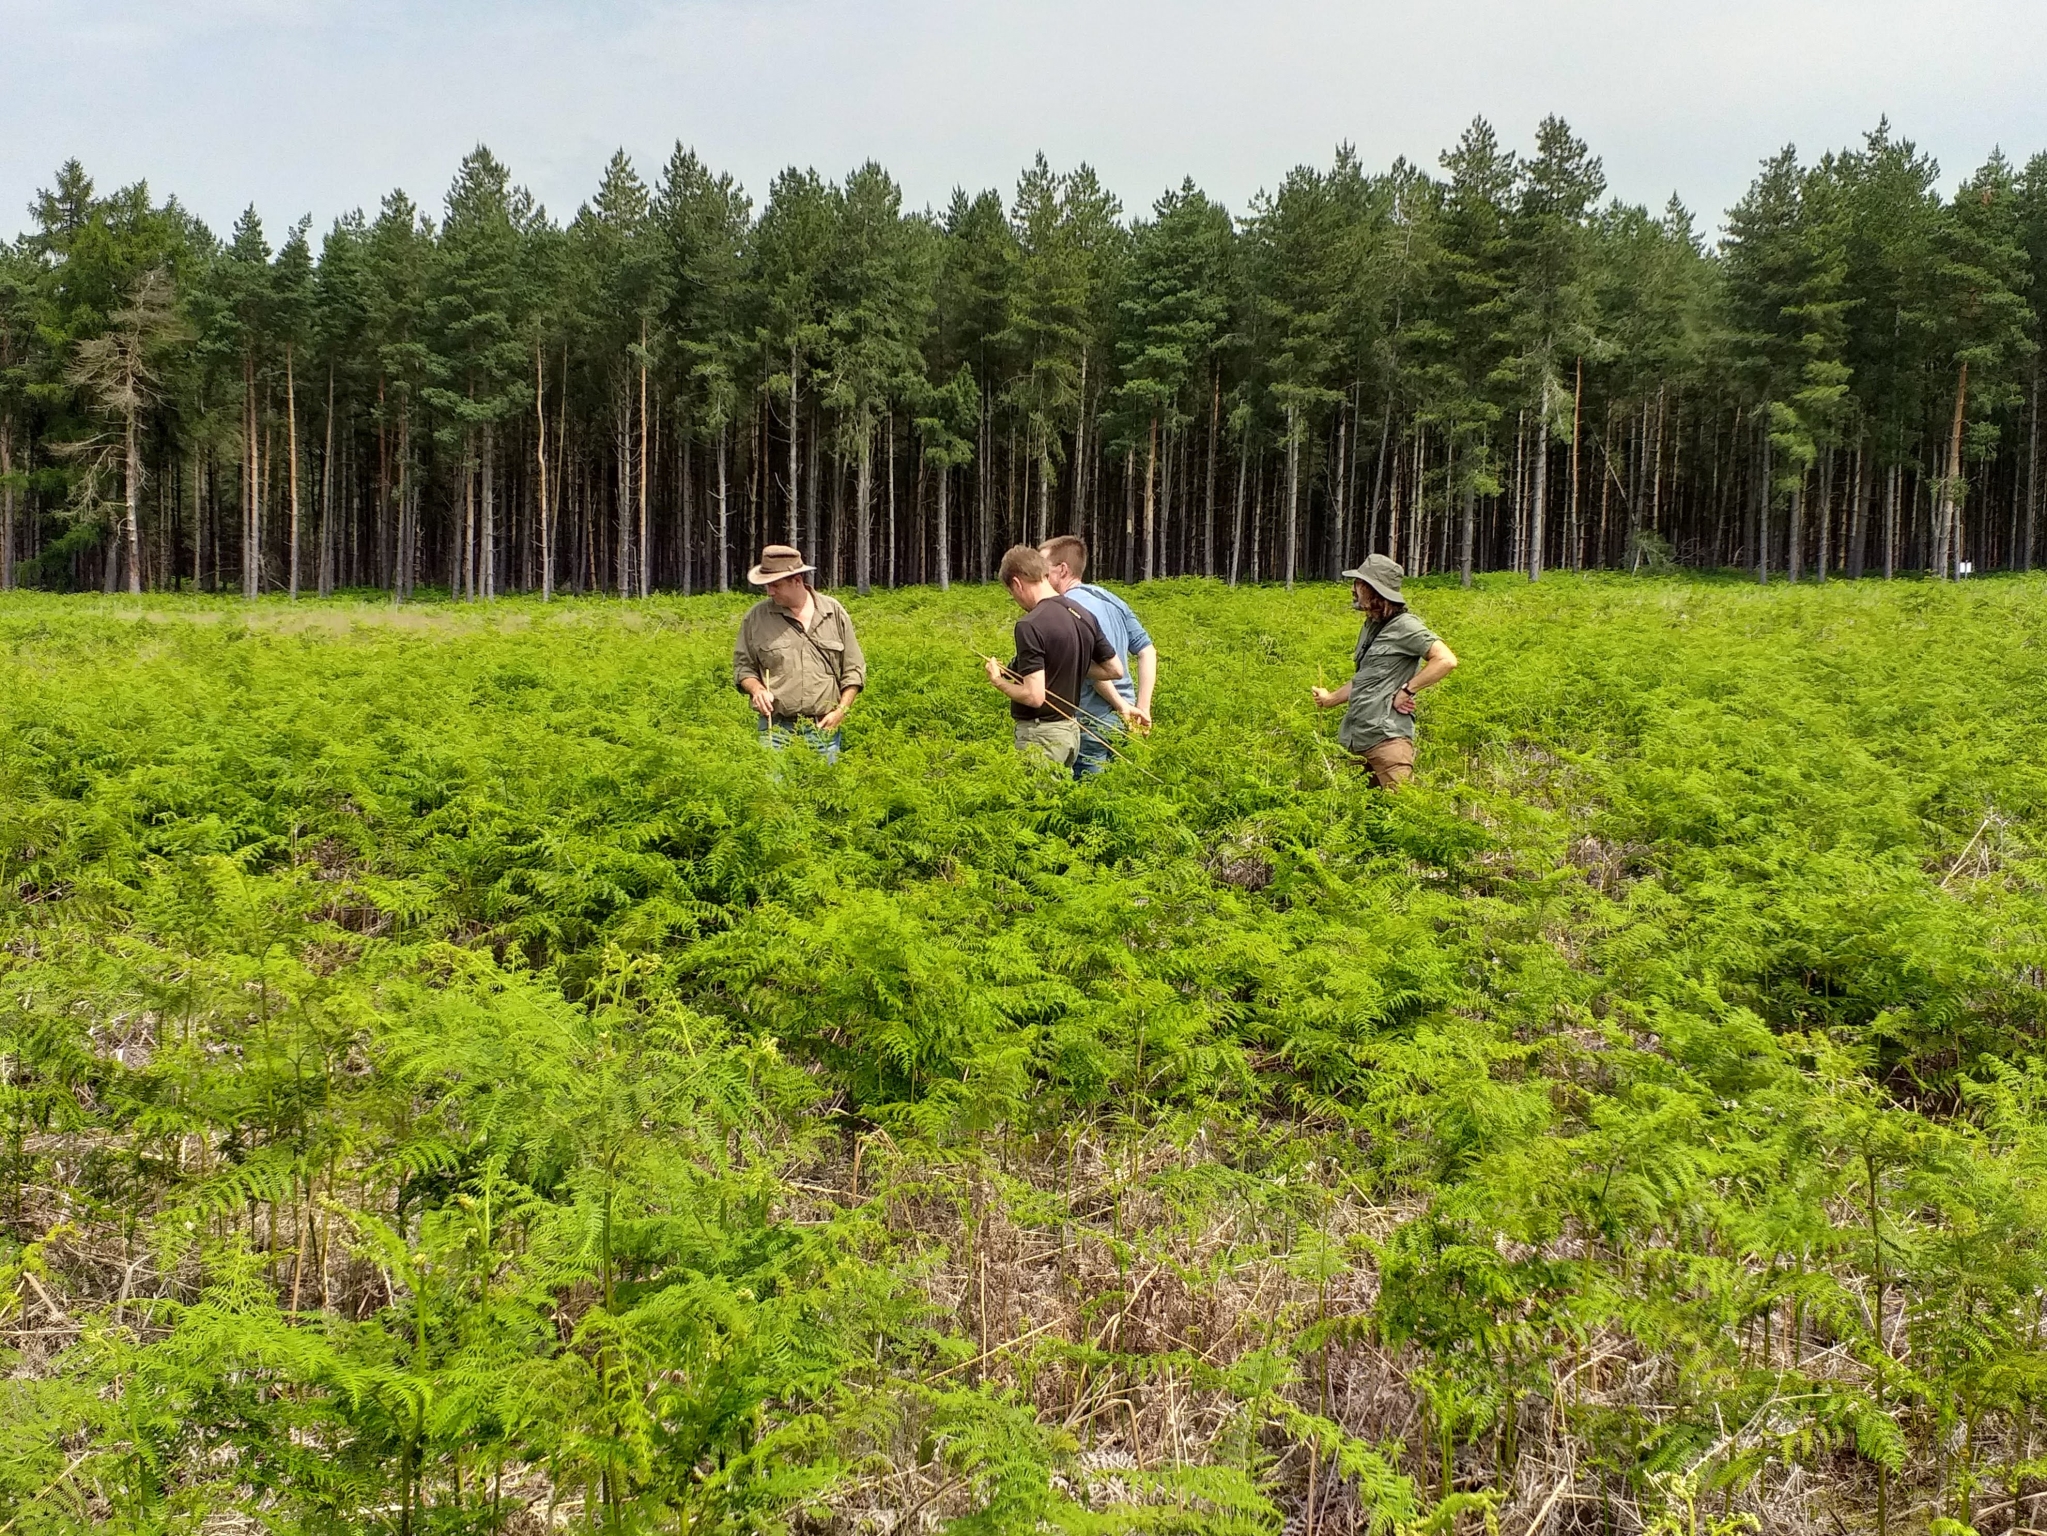 A photo from the FoTF Conservation Event - June 2019 - Nightjar Nest Hunt with members of the BTO - British Trust for Ornithology : The volunteers fan out amongst the bracken looking for Nightjar nests